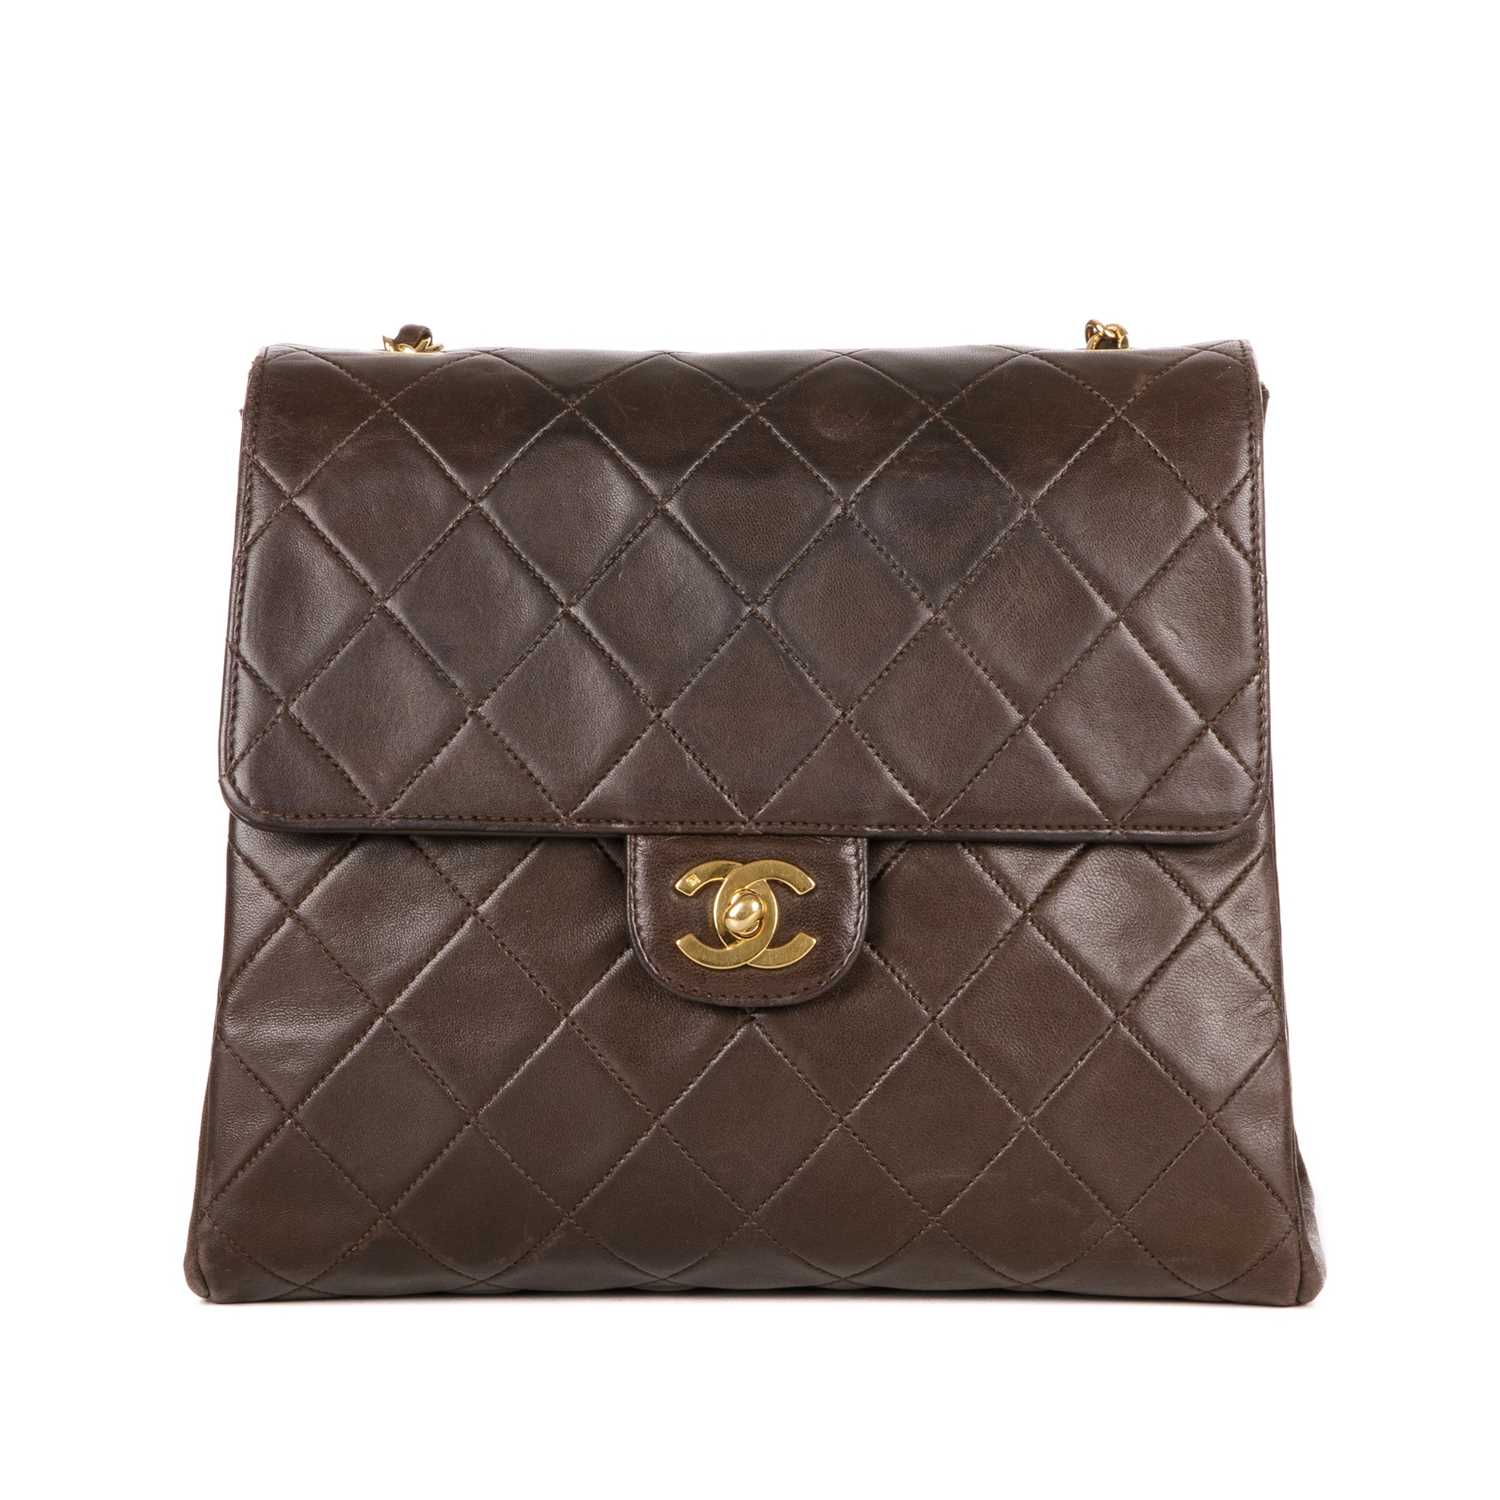 Chanel, a vintage Single Flap handbag, designed with a diamond quilted brown lambskin leather